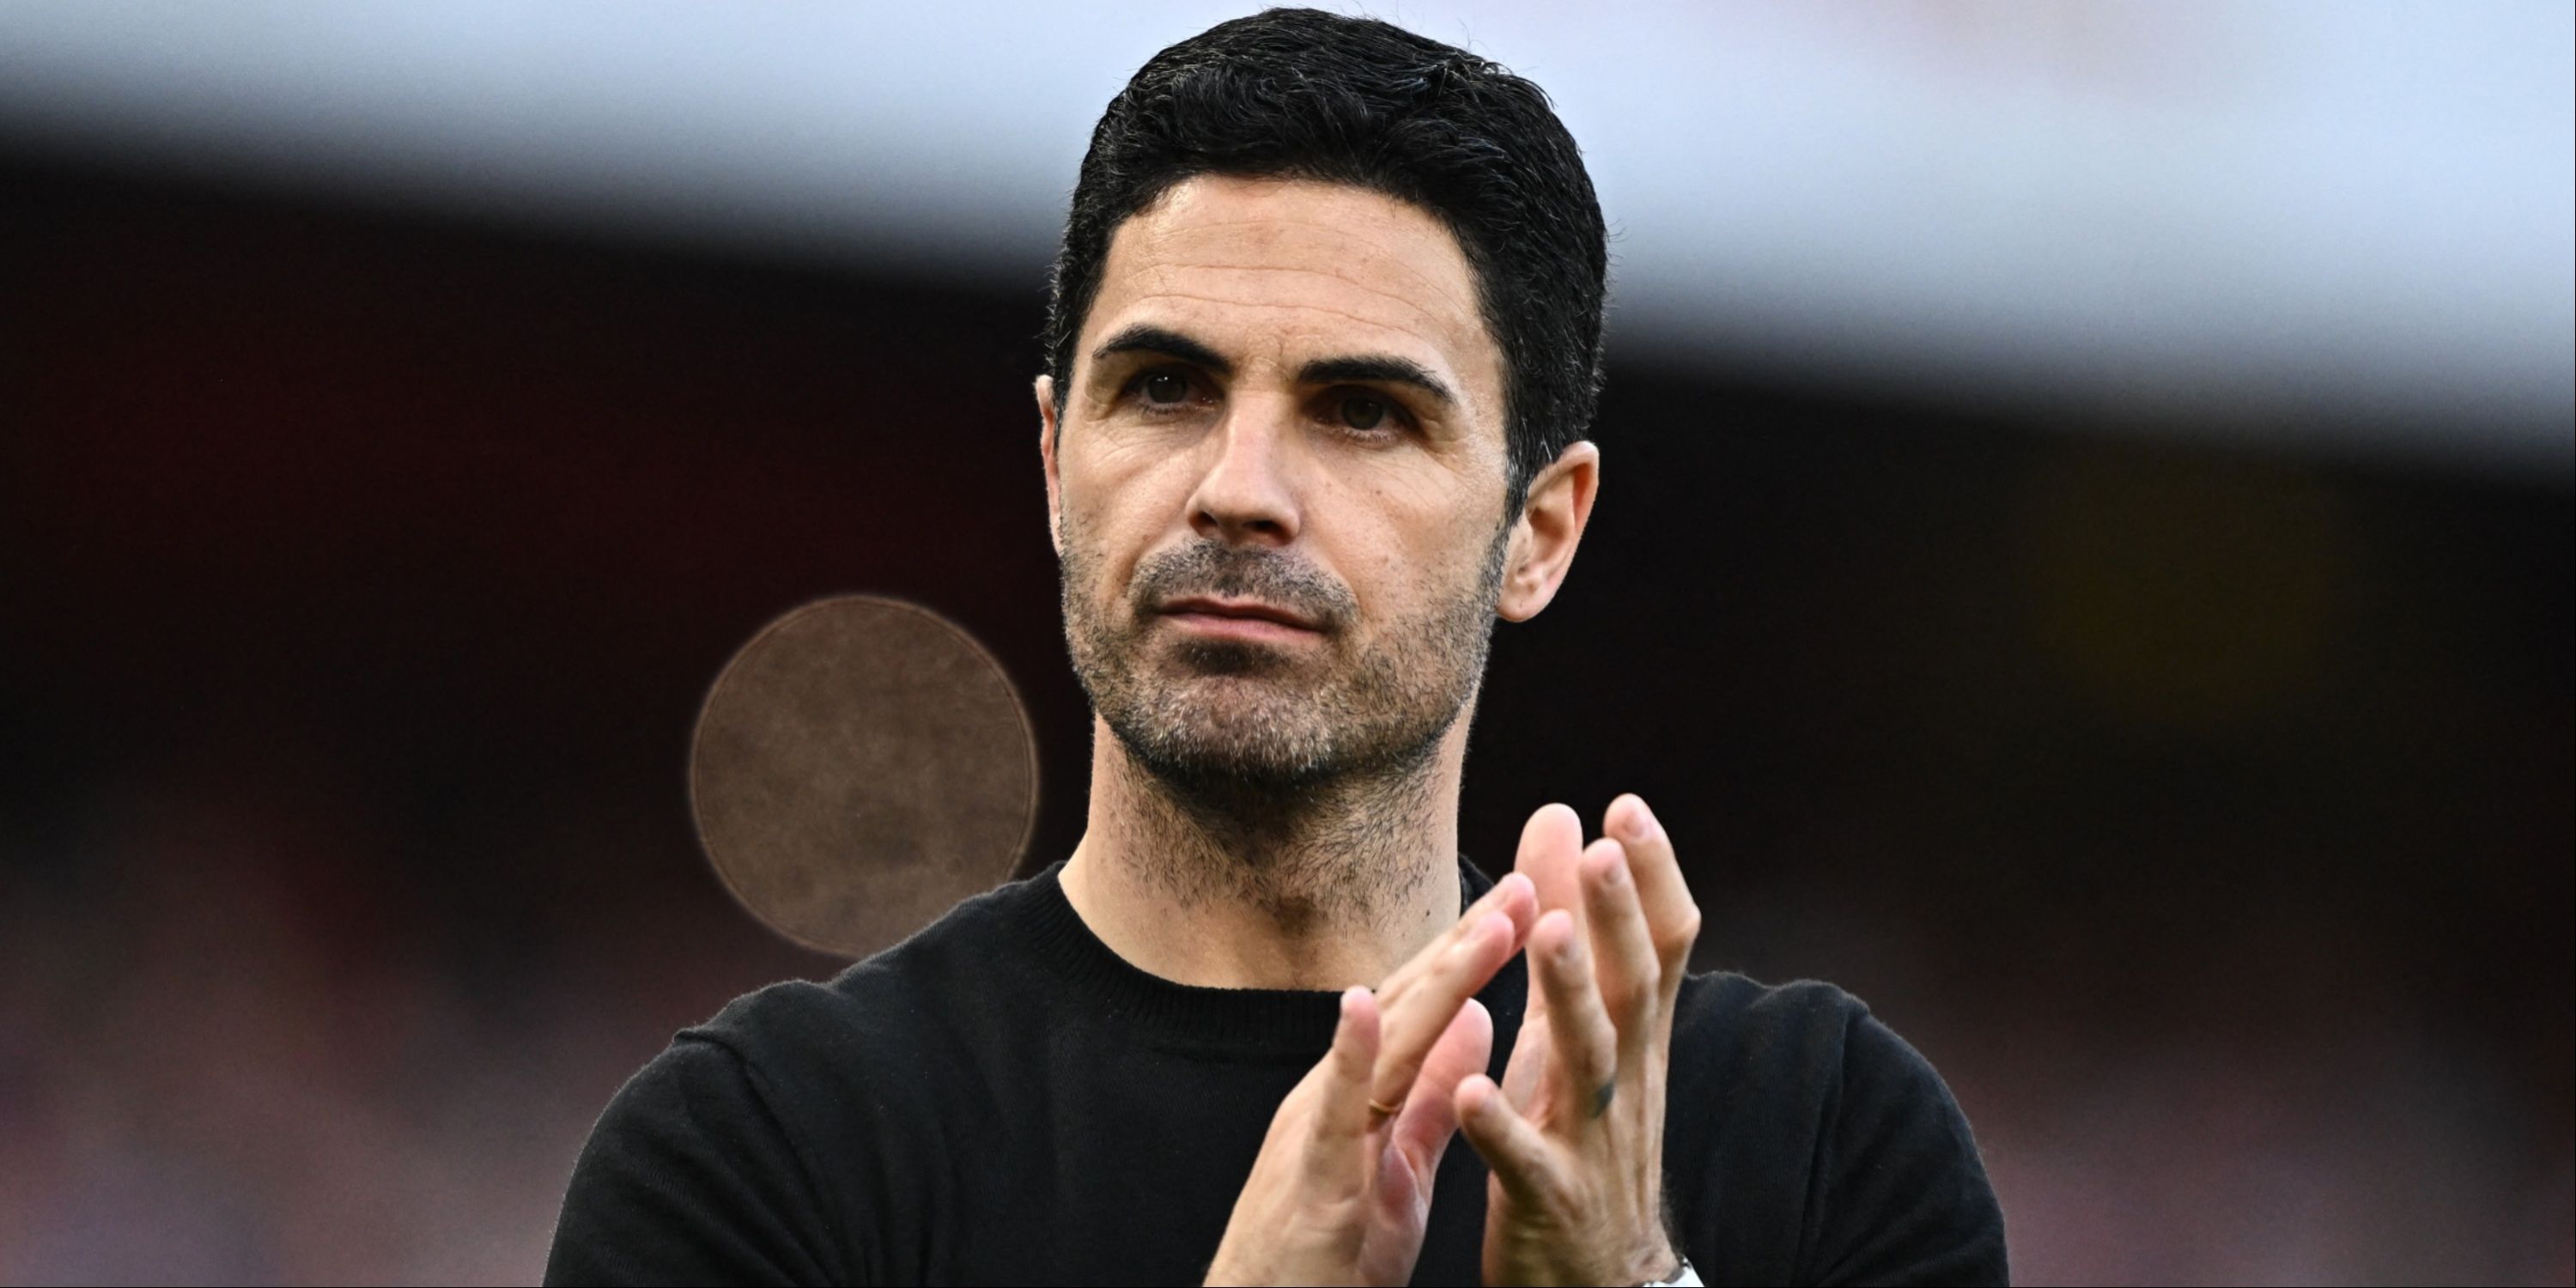 Arsenal boss Mikel Arteta applauding the supporters